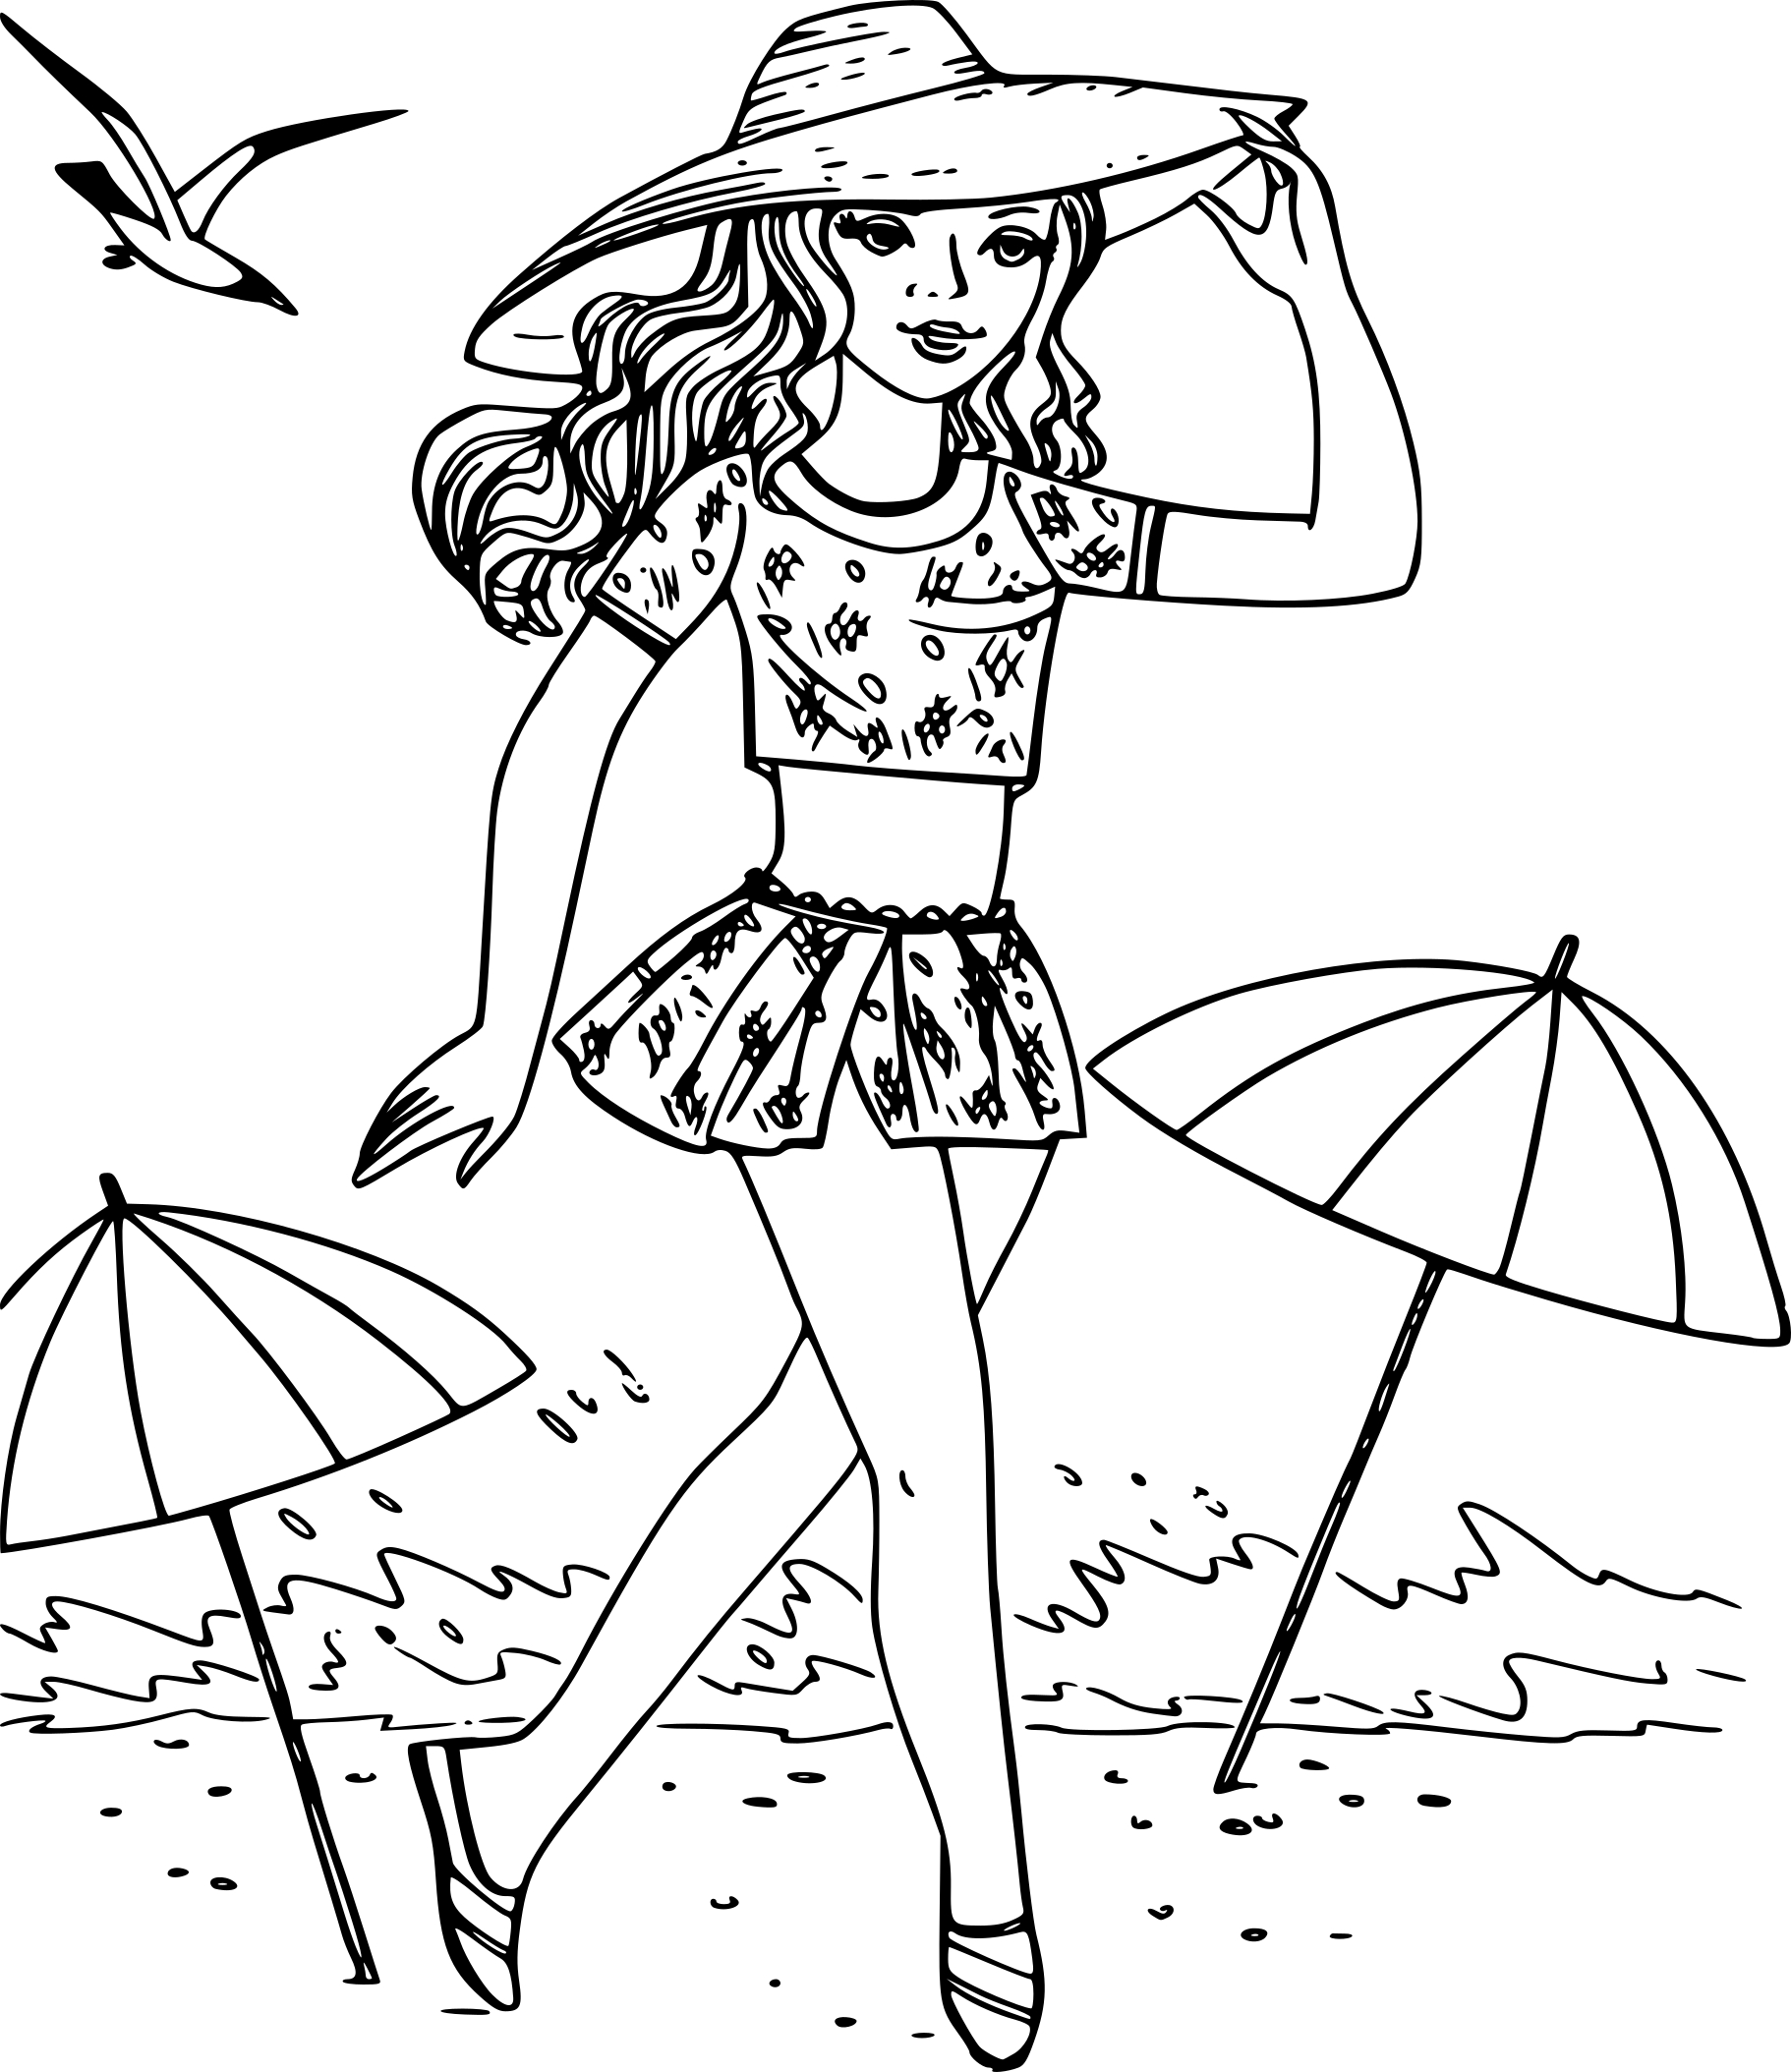 Girl At The Beach On Vacation coloring page